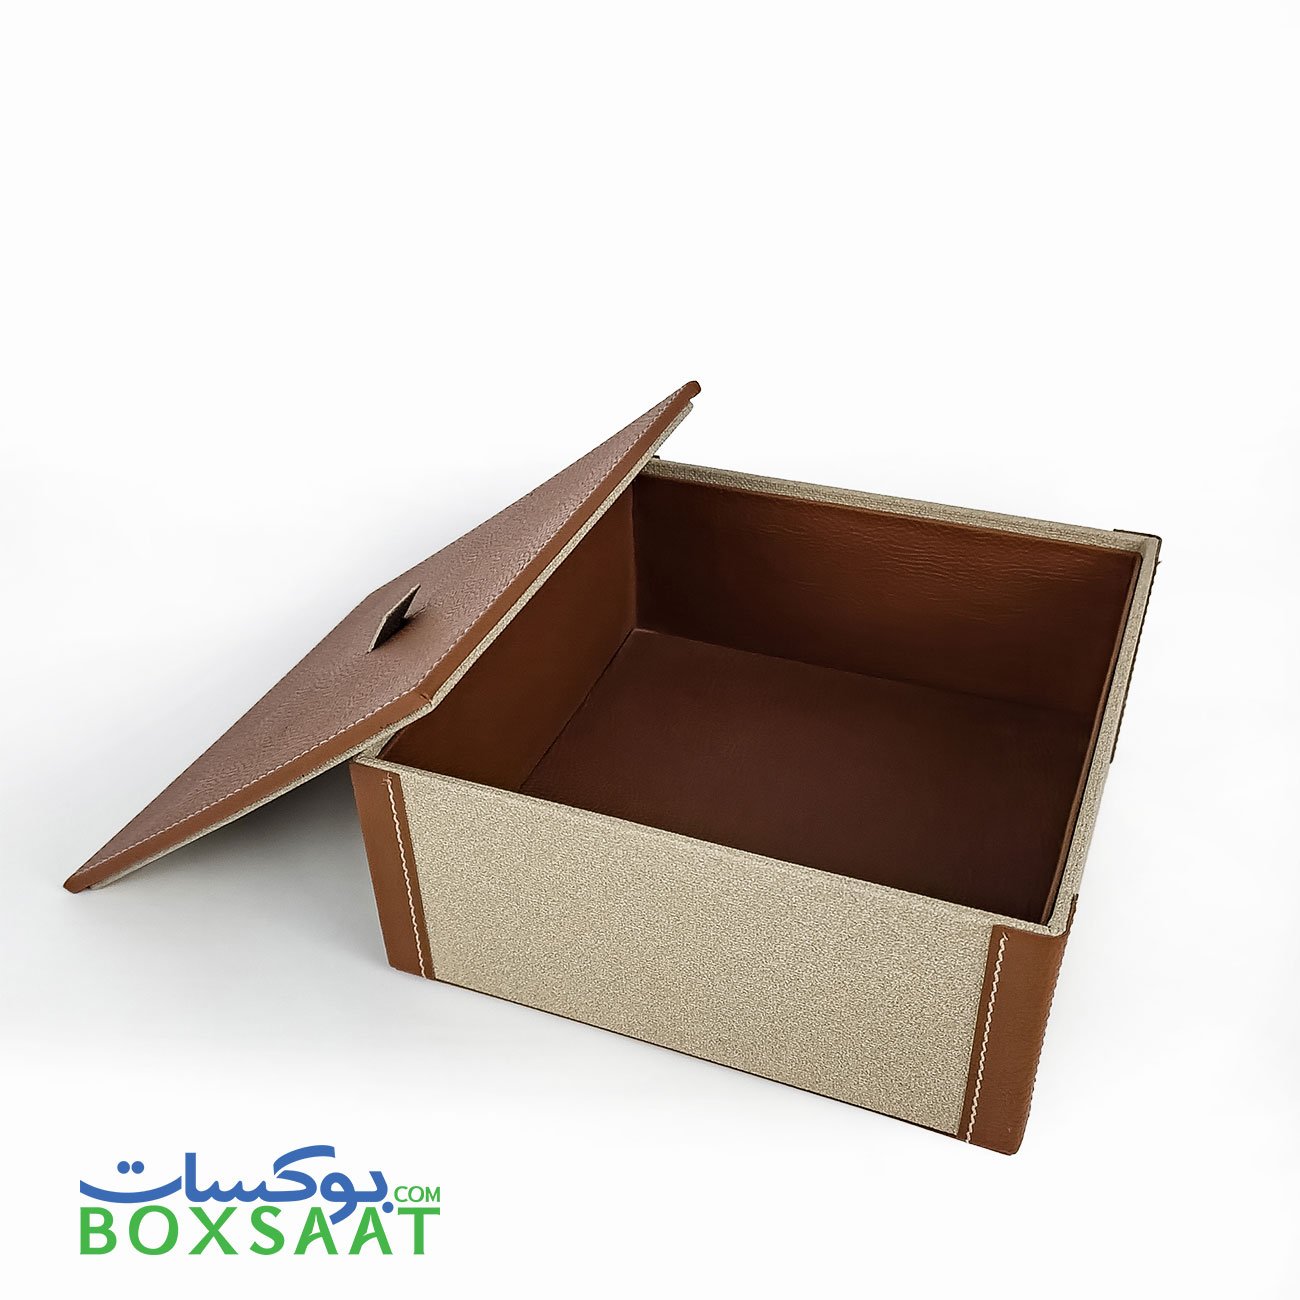 PU or Faux Leather box with top lid and beautiful Textured Leather Ready made gift boxes